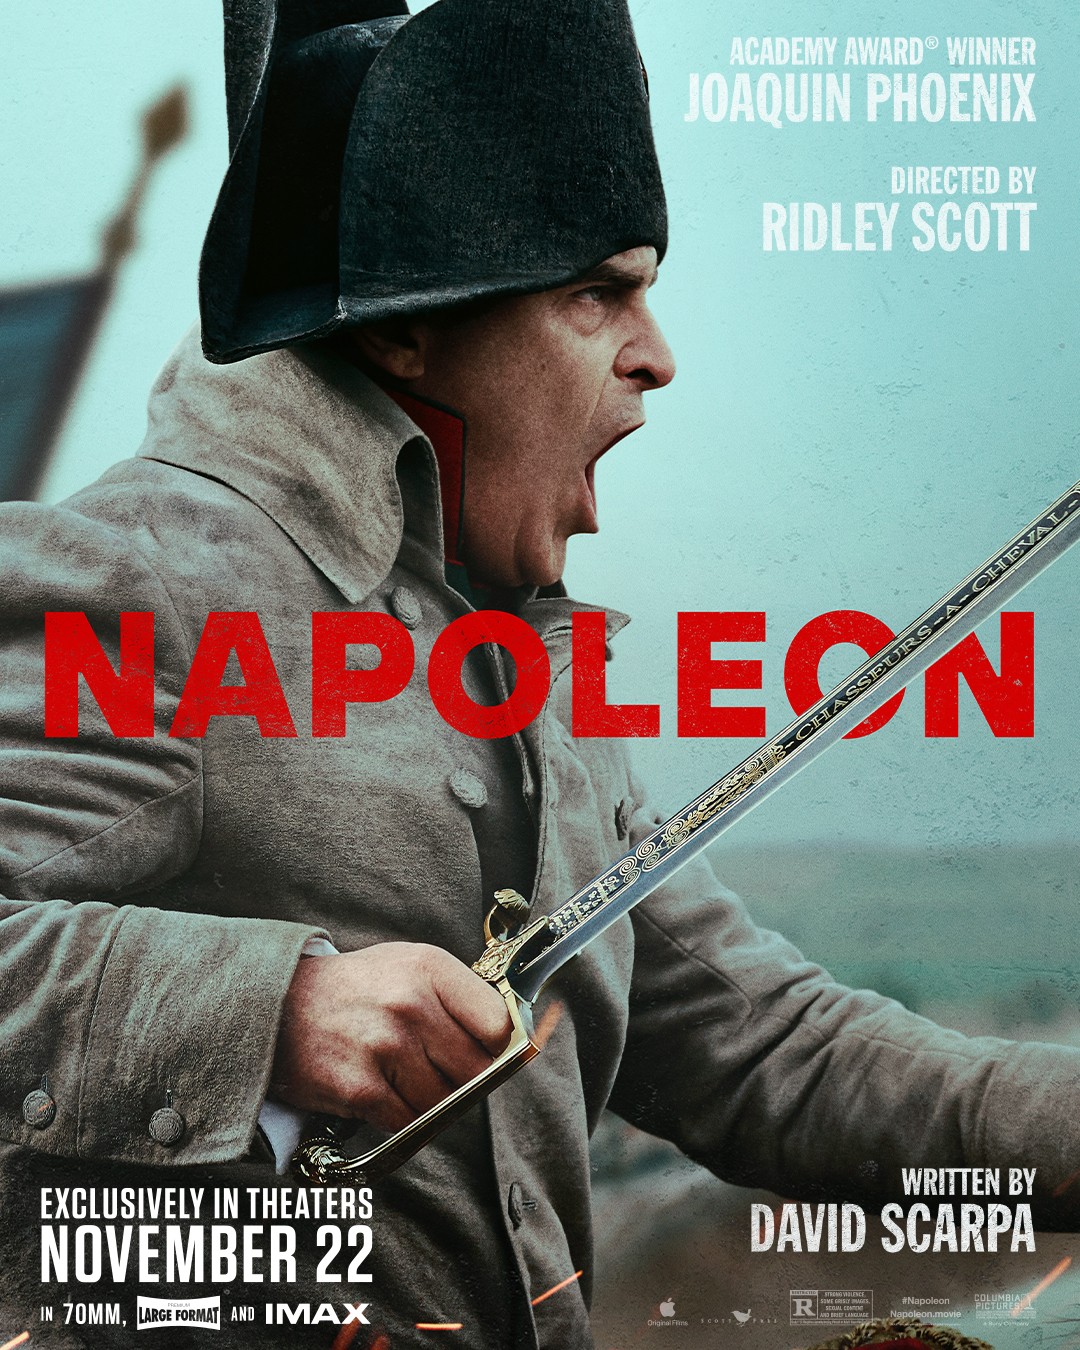 Napoleon Debuts On Rotten Tomatoes With Promising Score!